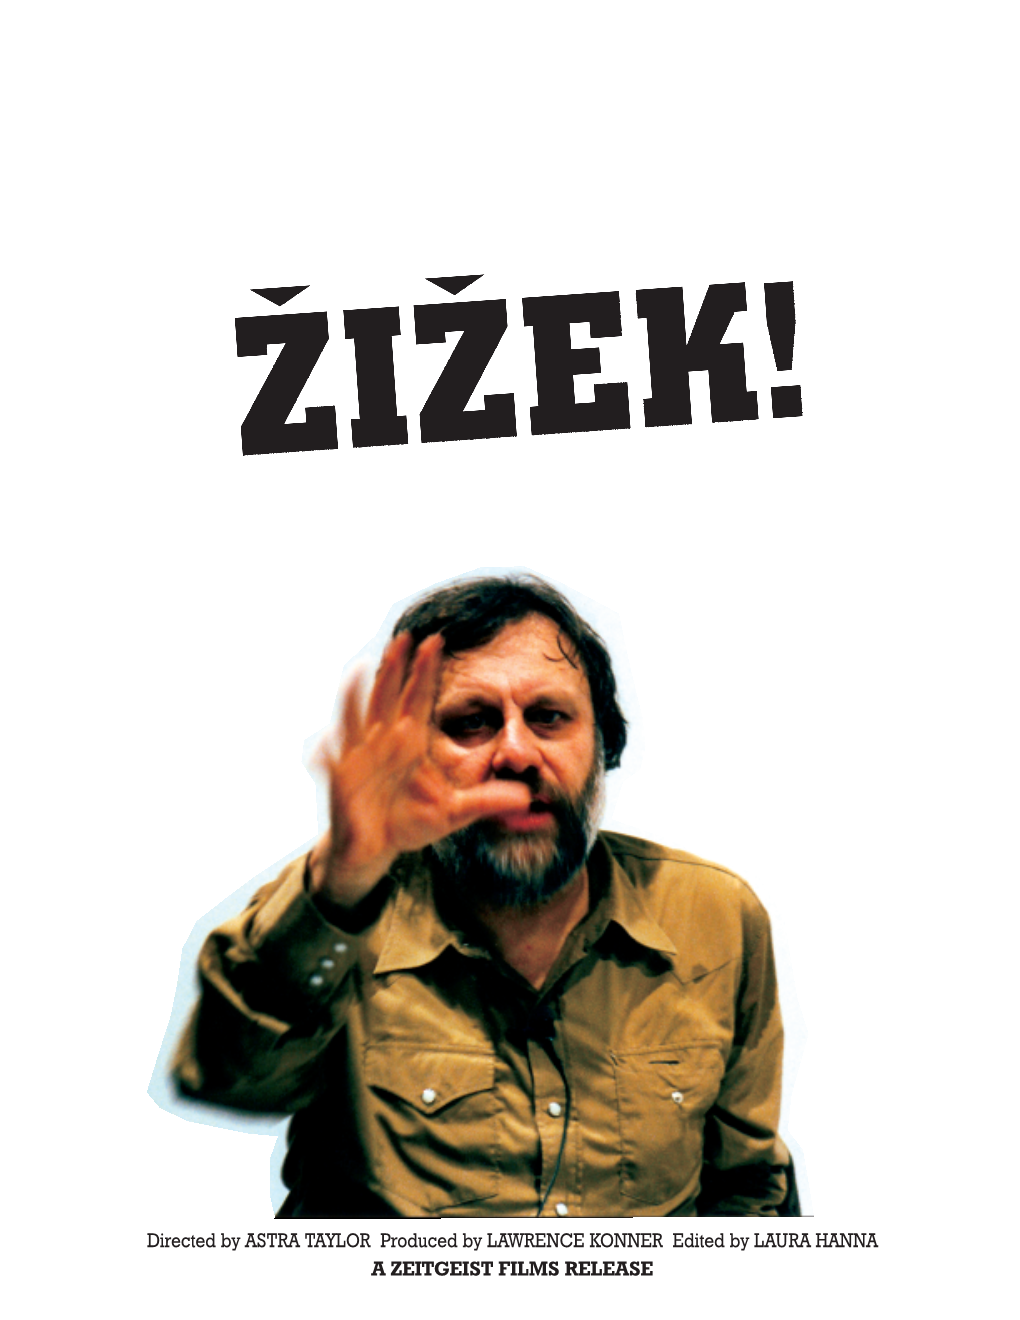 Slavoj Zizek Is One of the Most Important—And Outrageous—Cultural Theorists Working Today